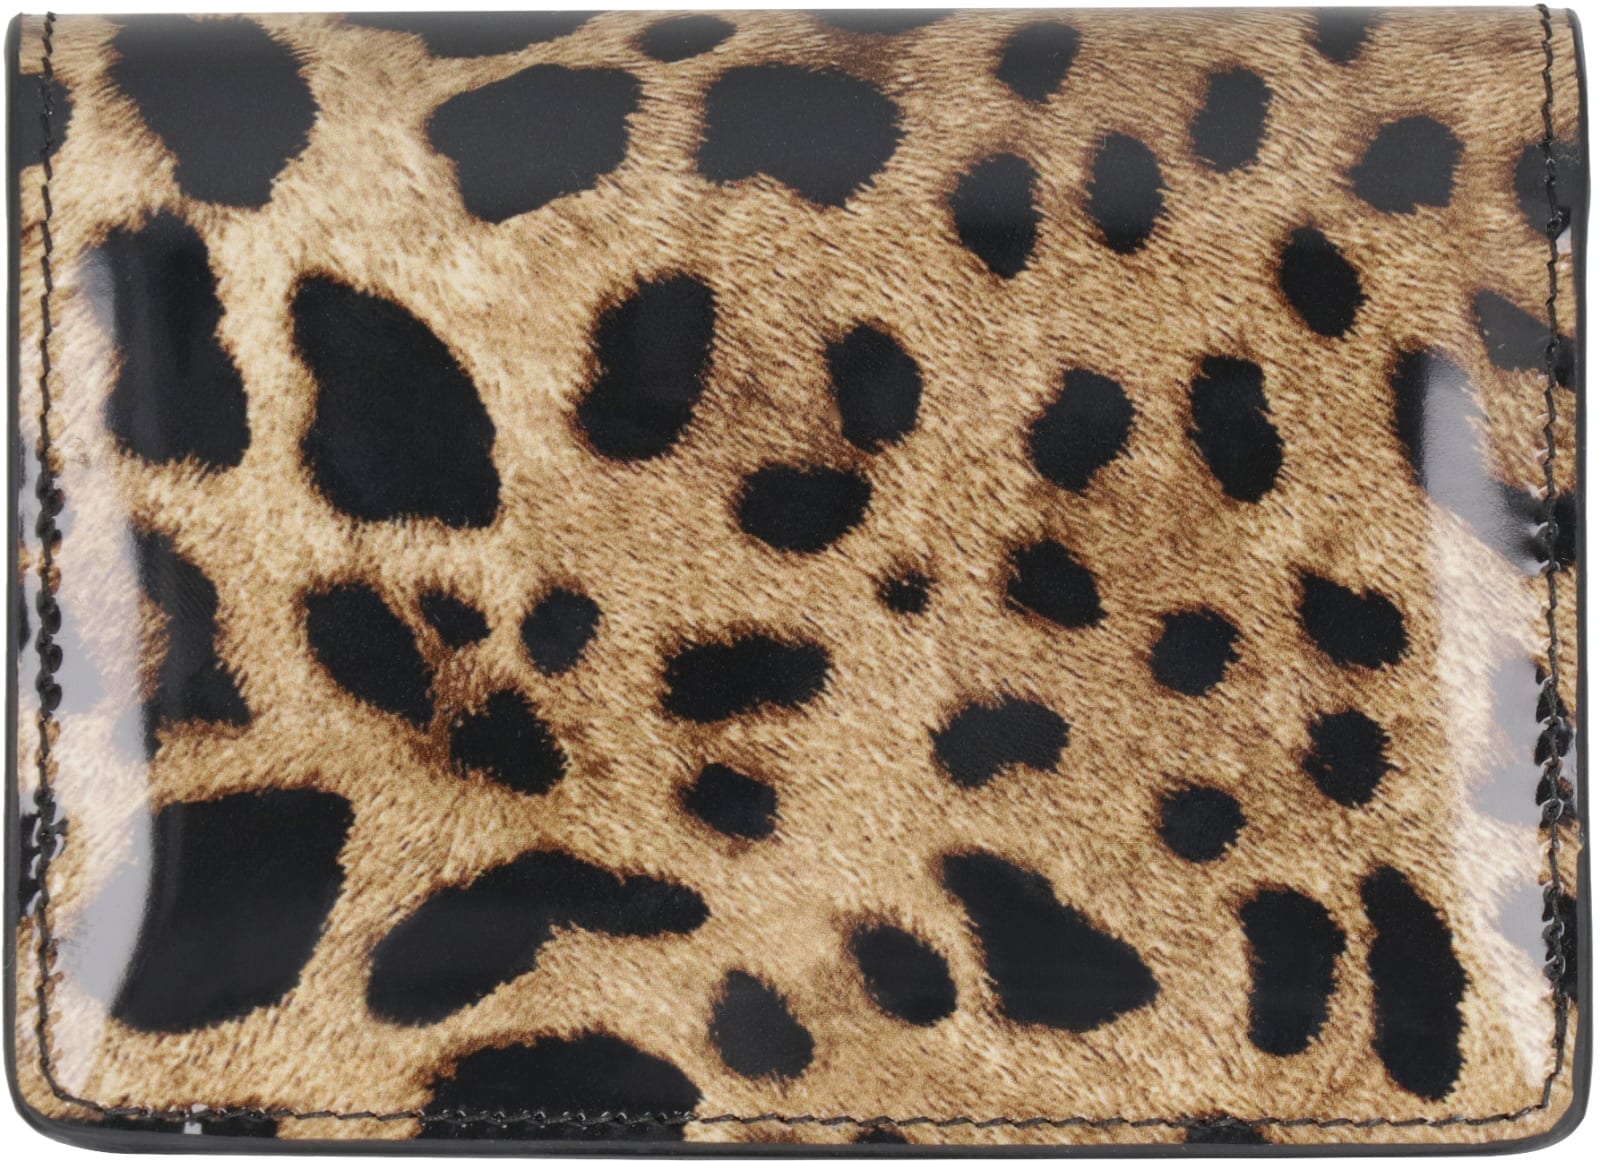 Shop Dolce & Gabbana Printed Leather Wallet